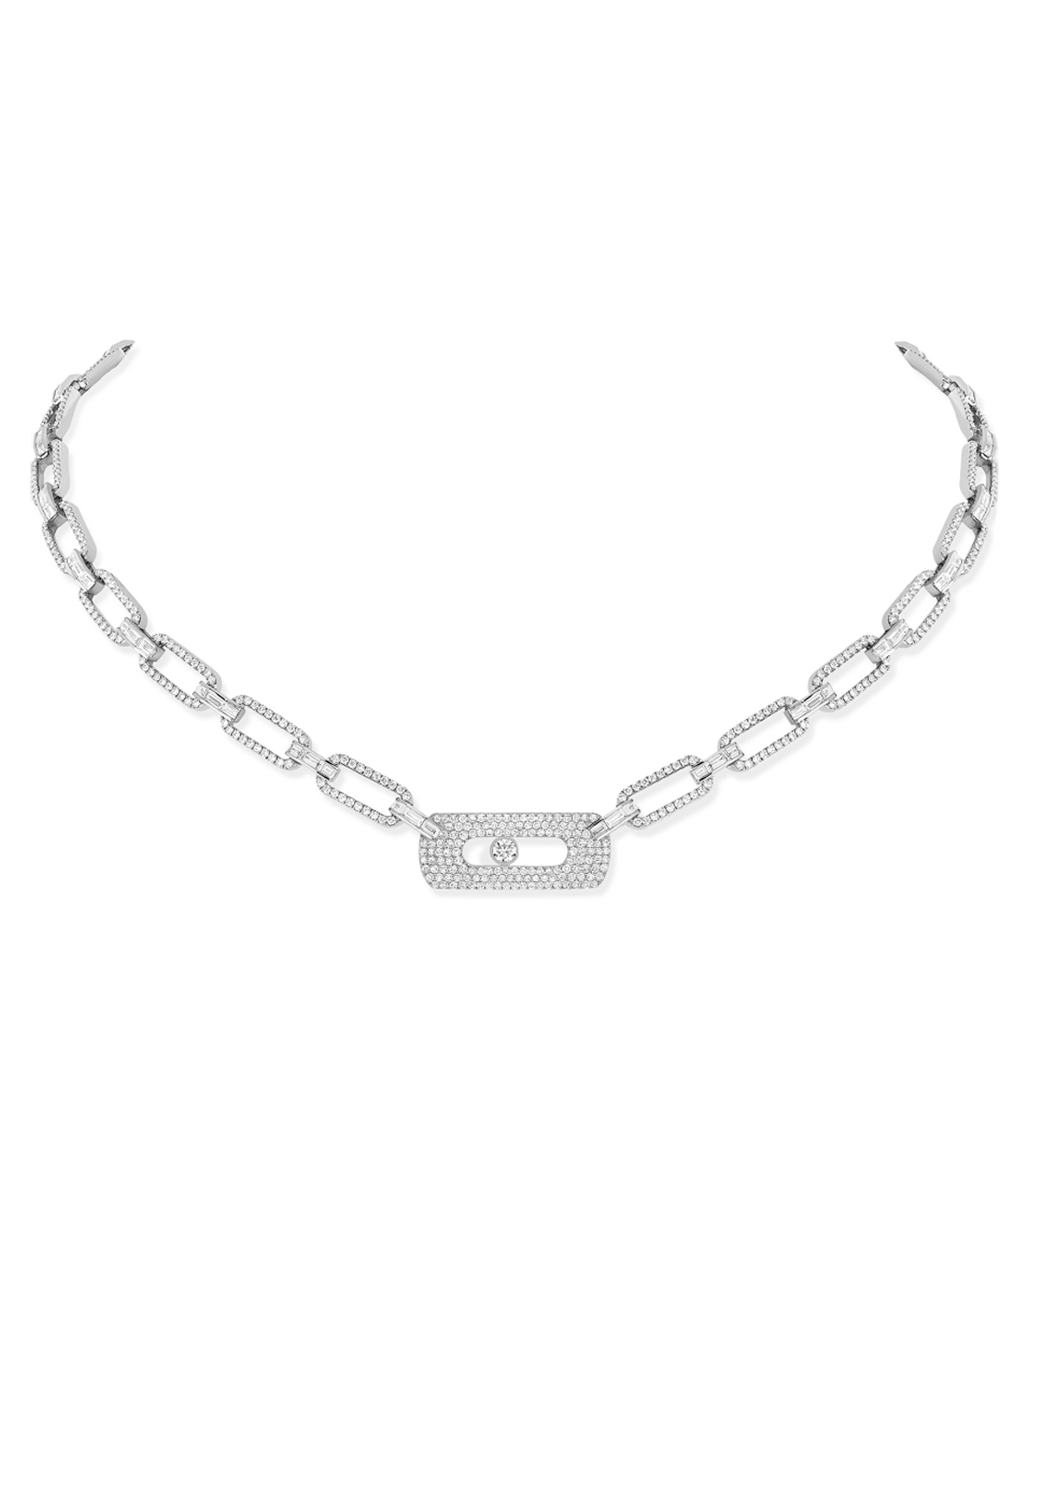 Messika Move Link Full 18KWG Pavé Diamond Chain Necklace | Ref. 12095 | OsterJewelers.com